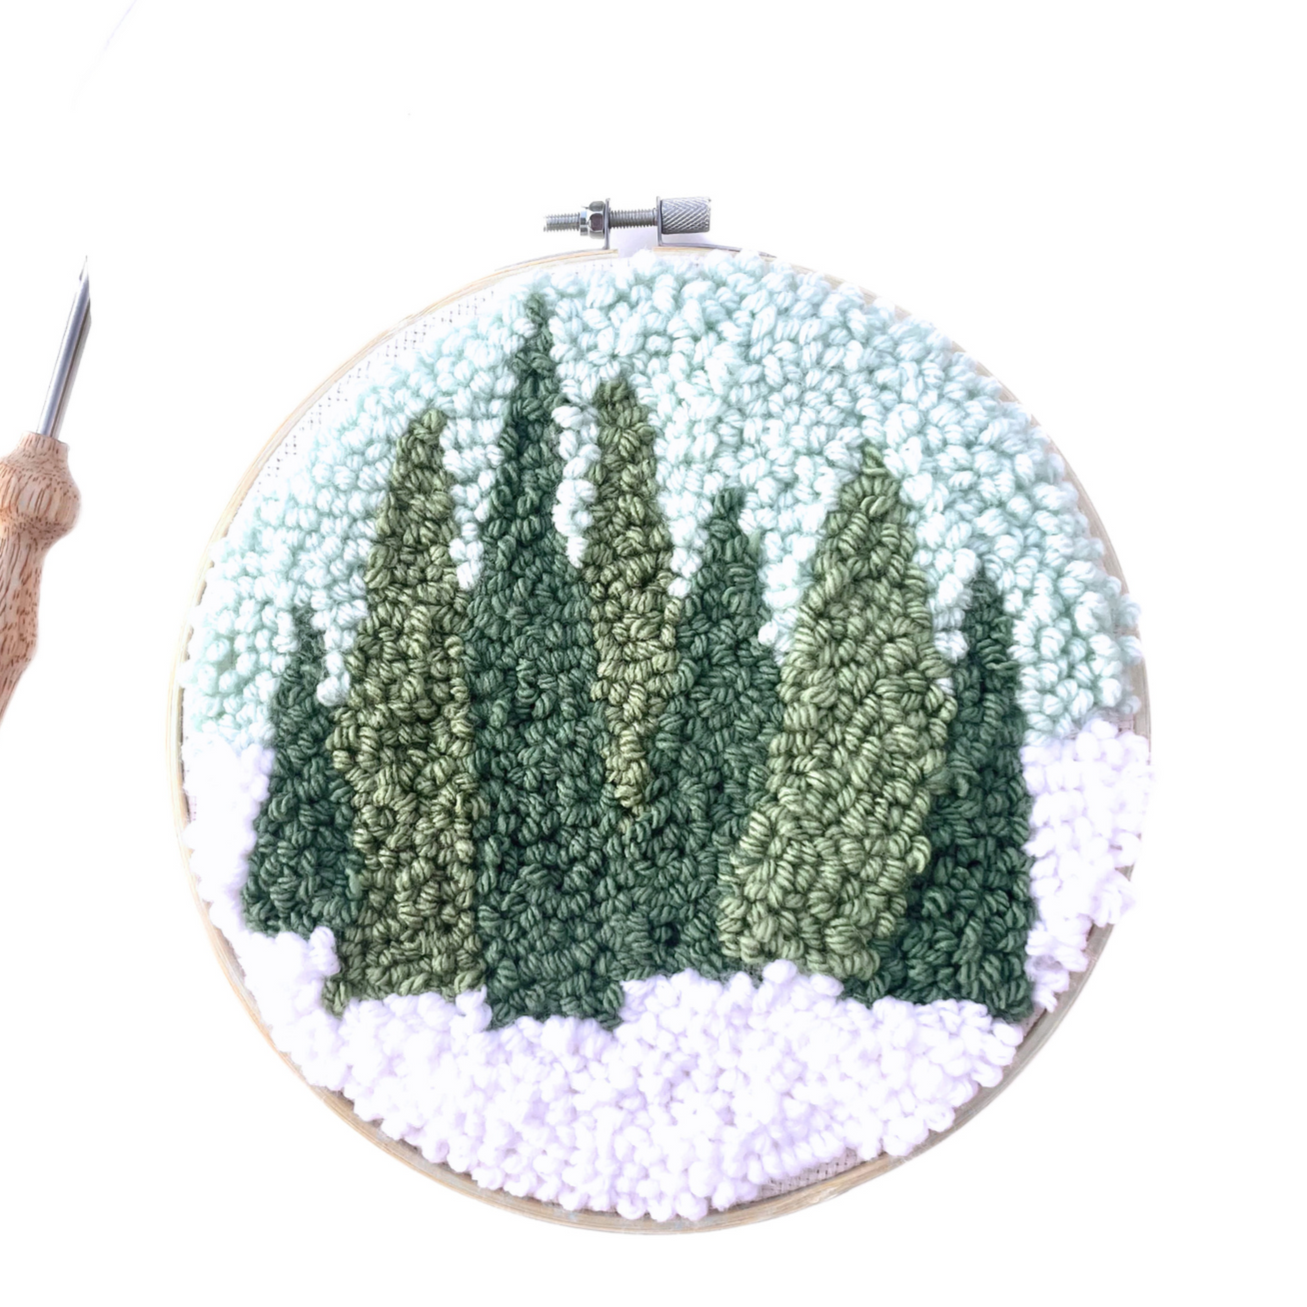 How About Trying An Embroidery Kit This Winter? (And Get A Good